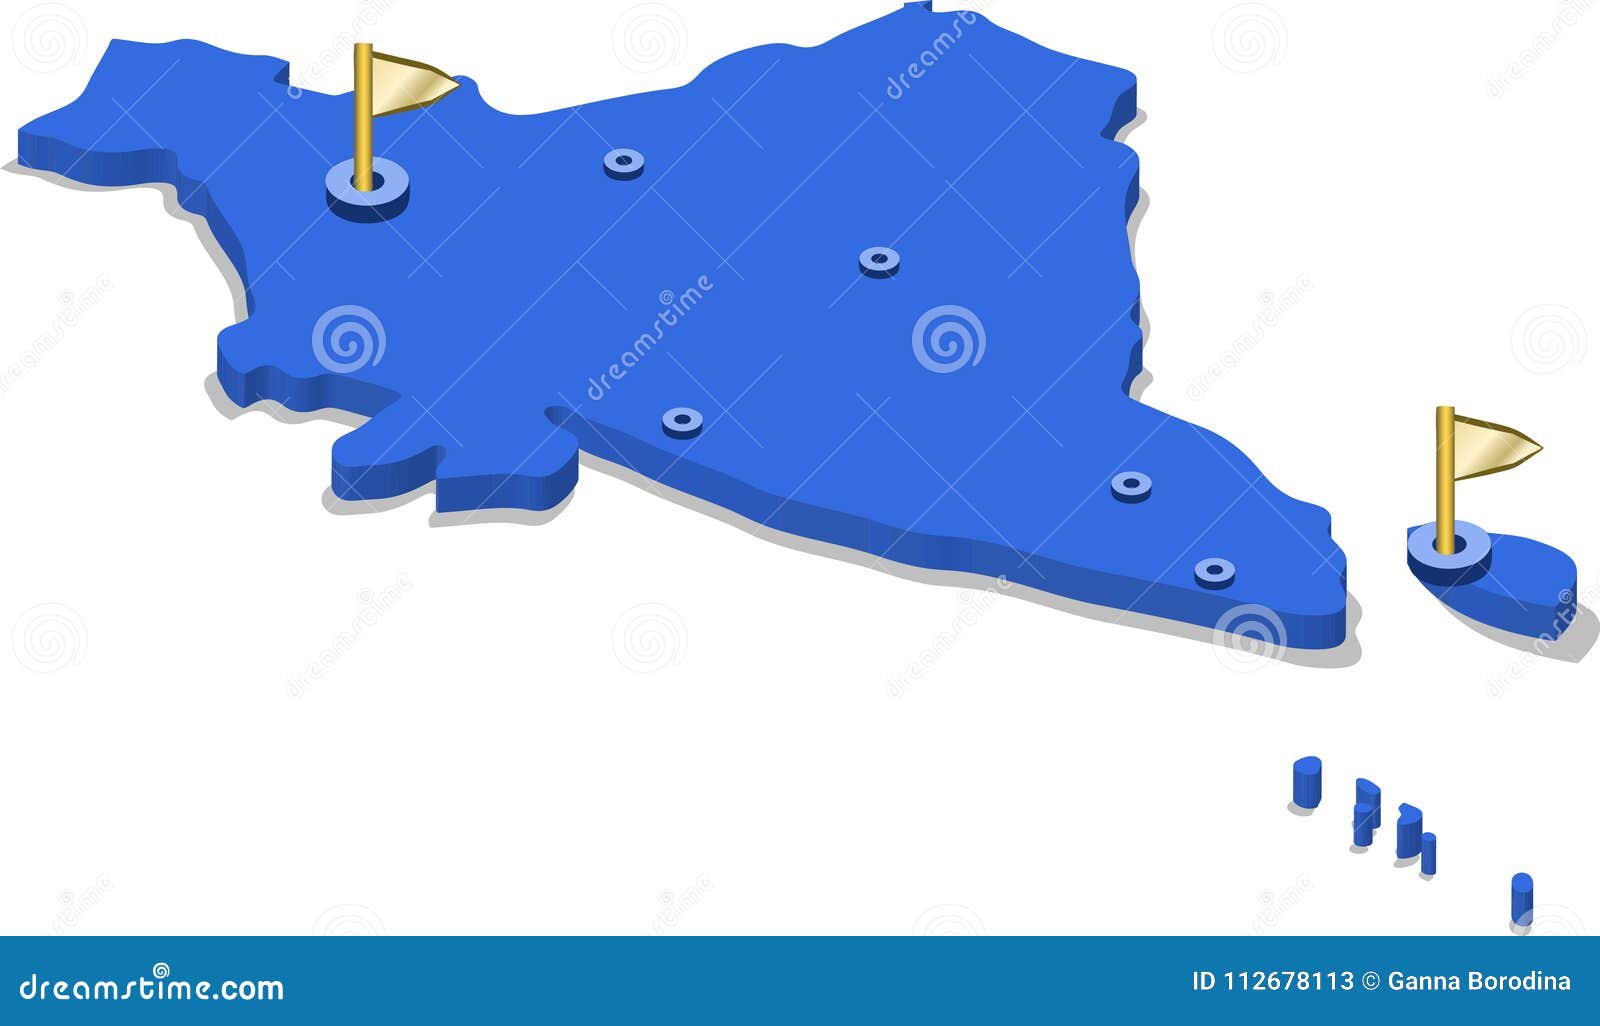 3d Isometric View Map of India with Blue Surface and Cities. Stock ...